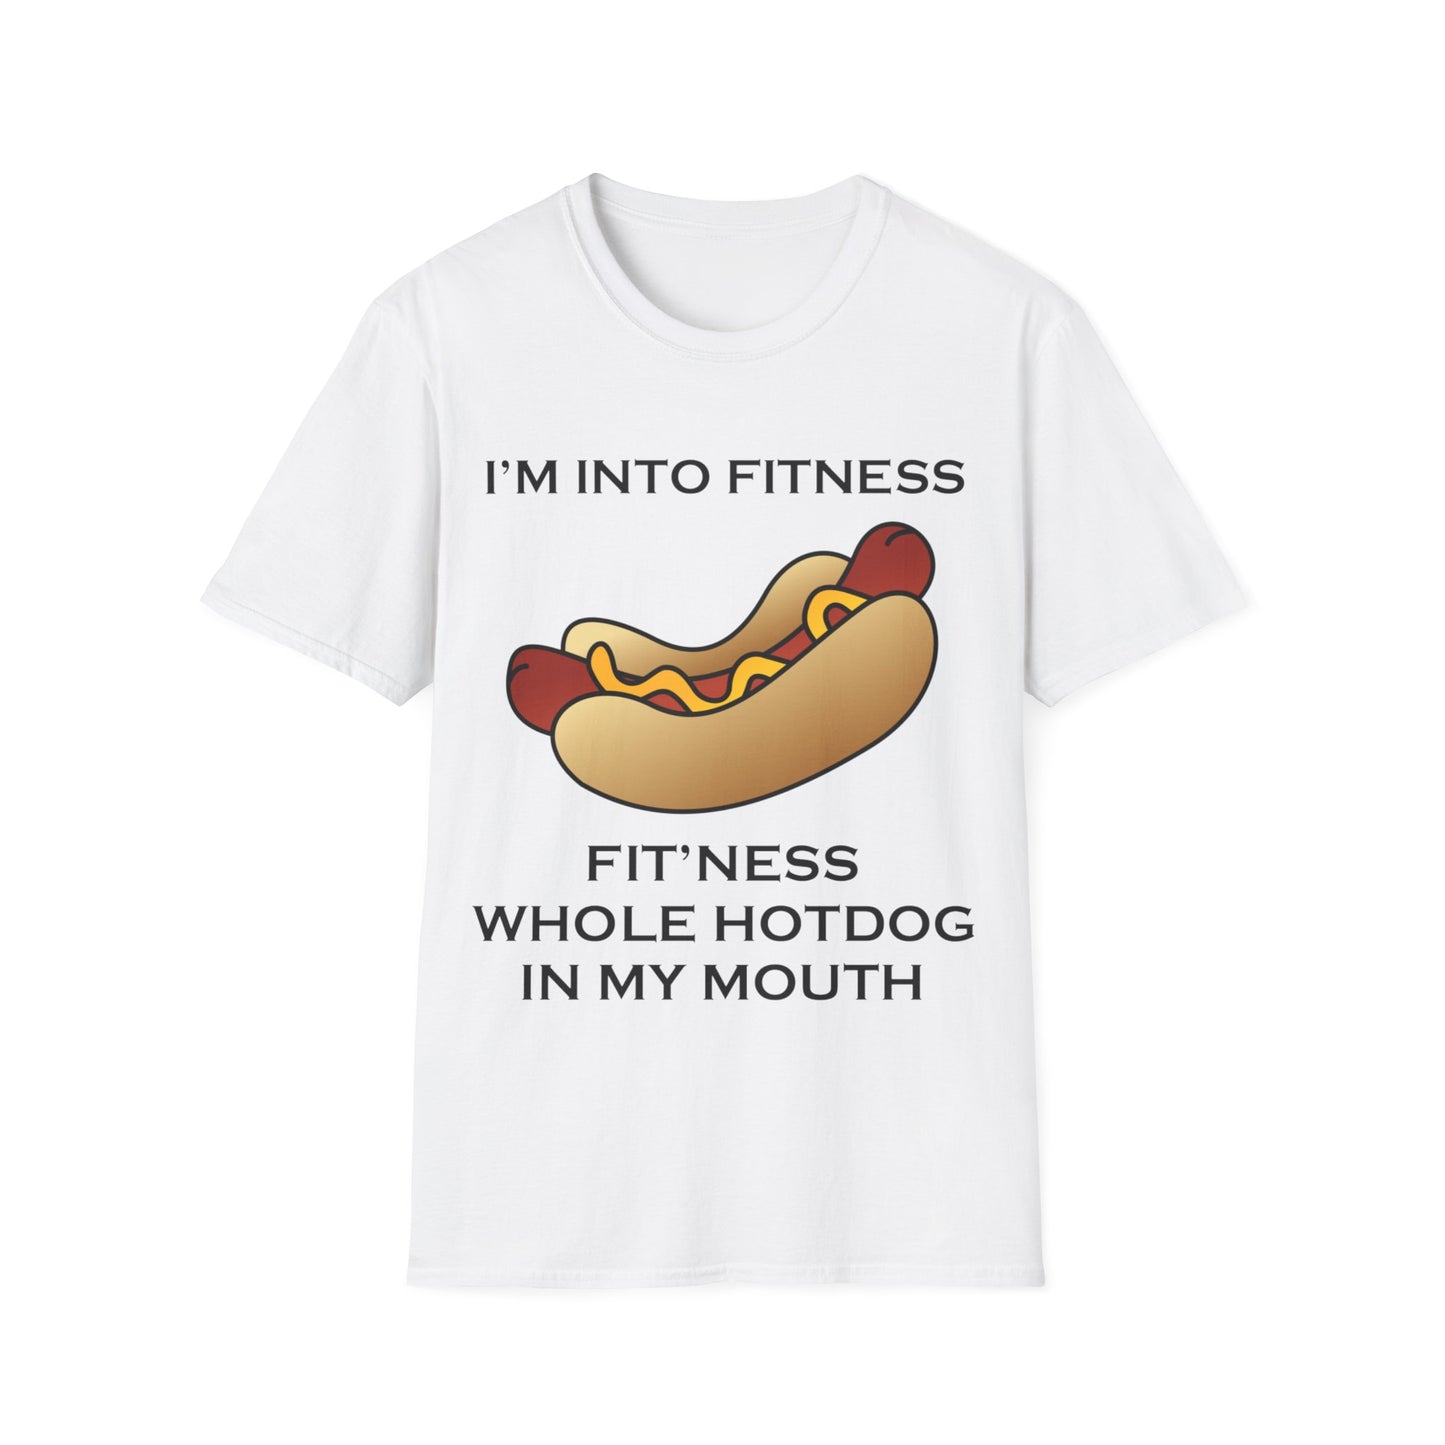 A white T-shirt with a design of a hot dog and a funny quote: I'm Into Fitness, Fit'ness whole Hotdog In My Mouth